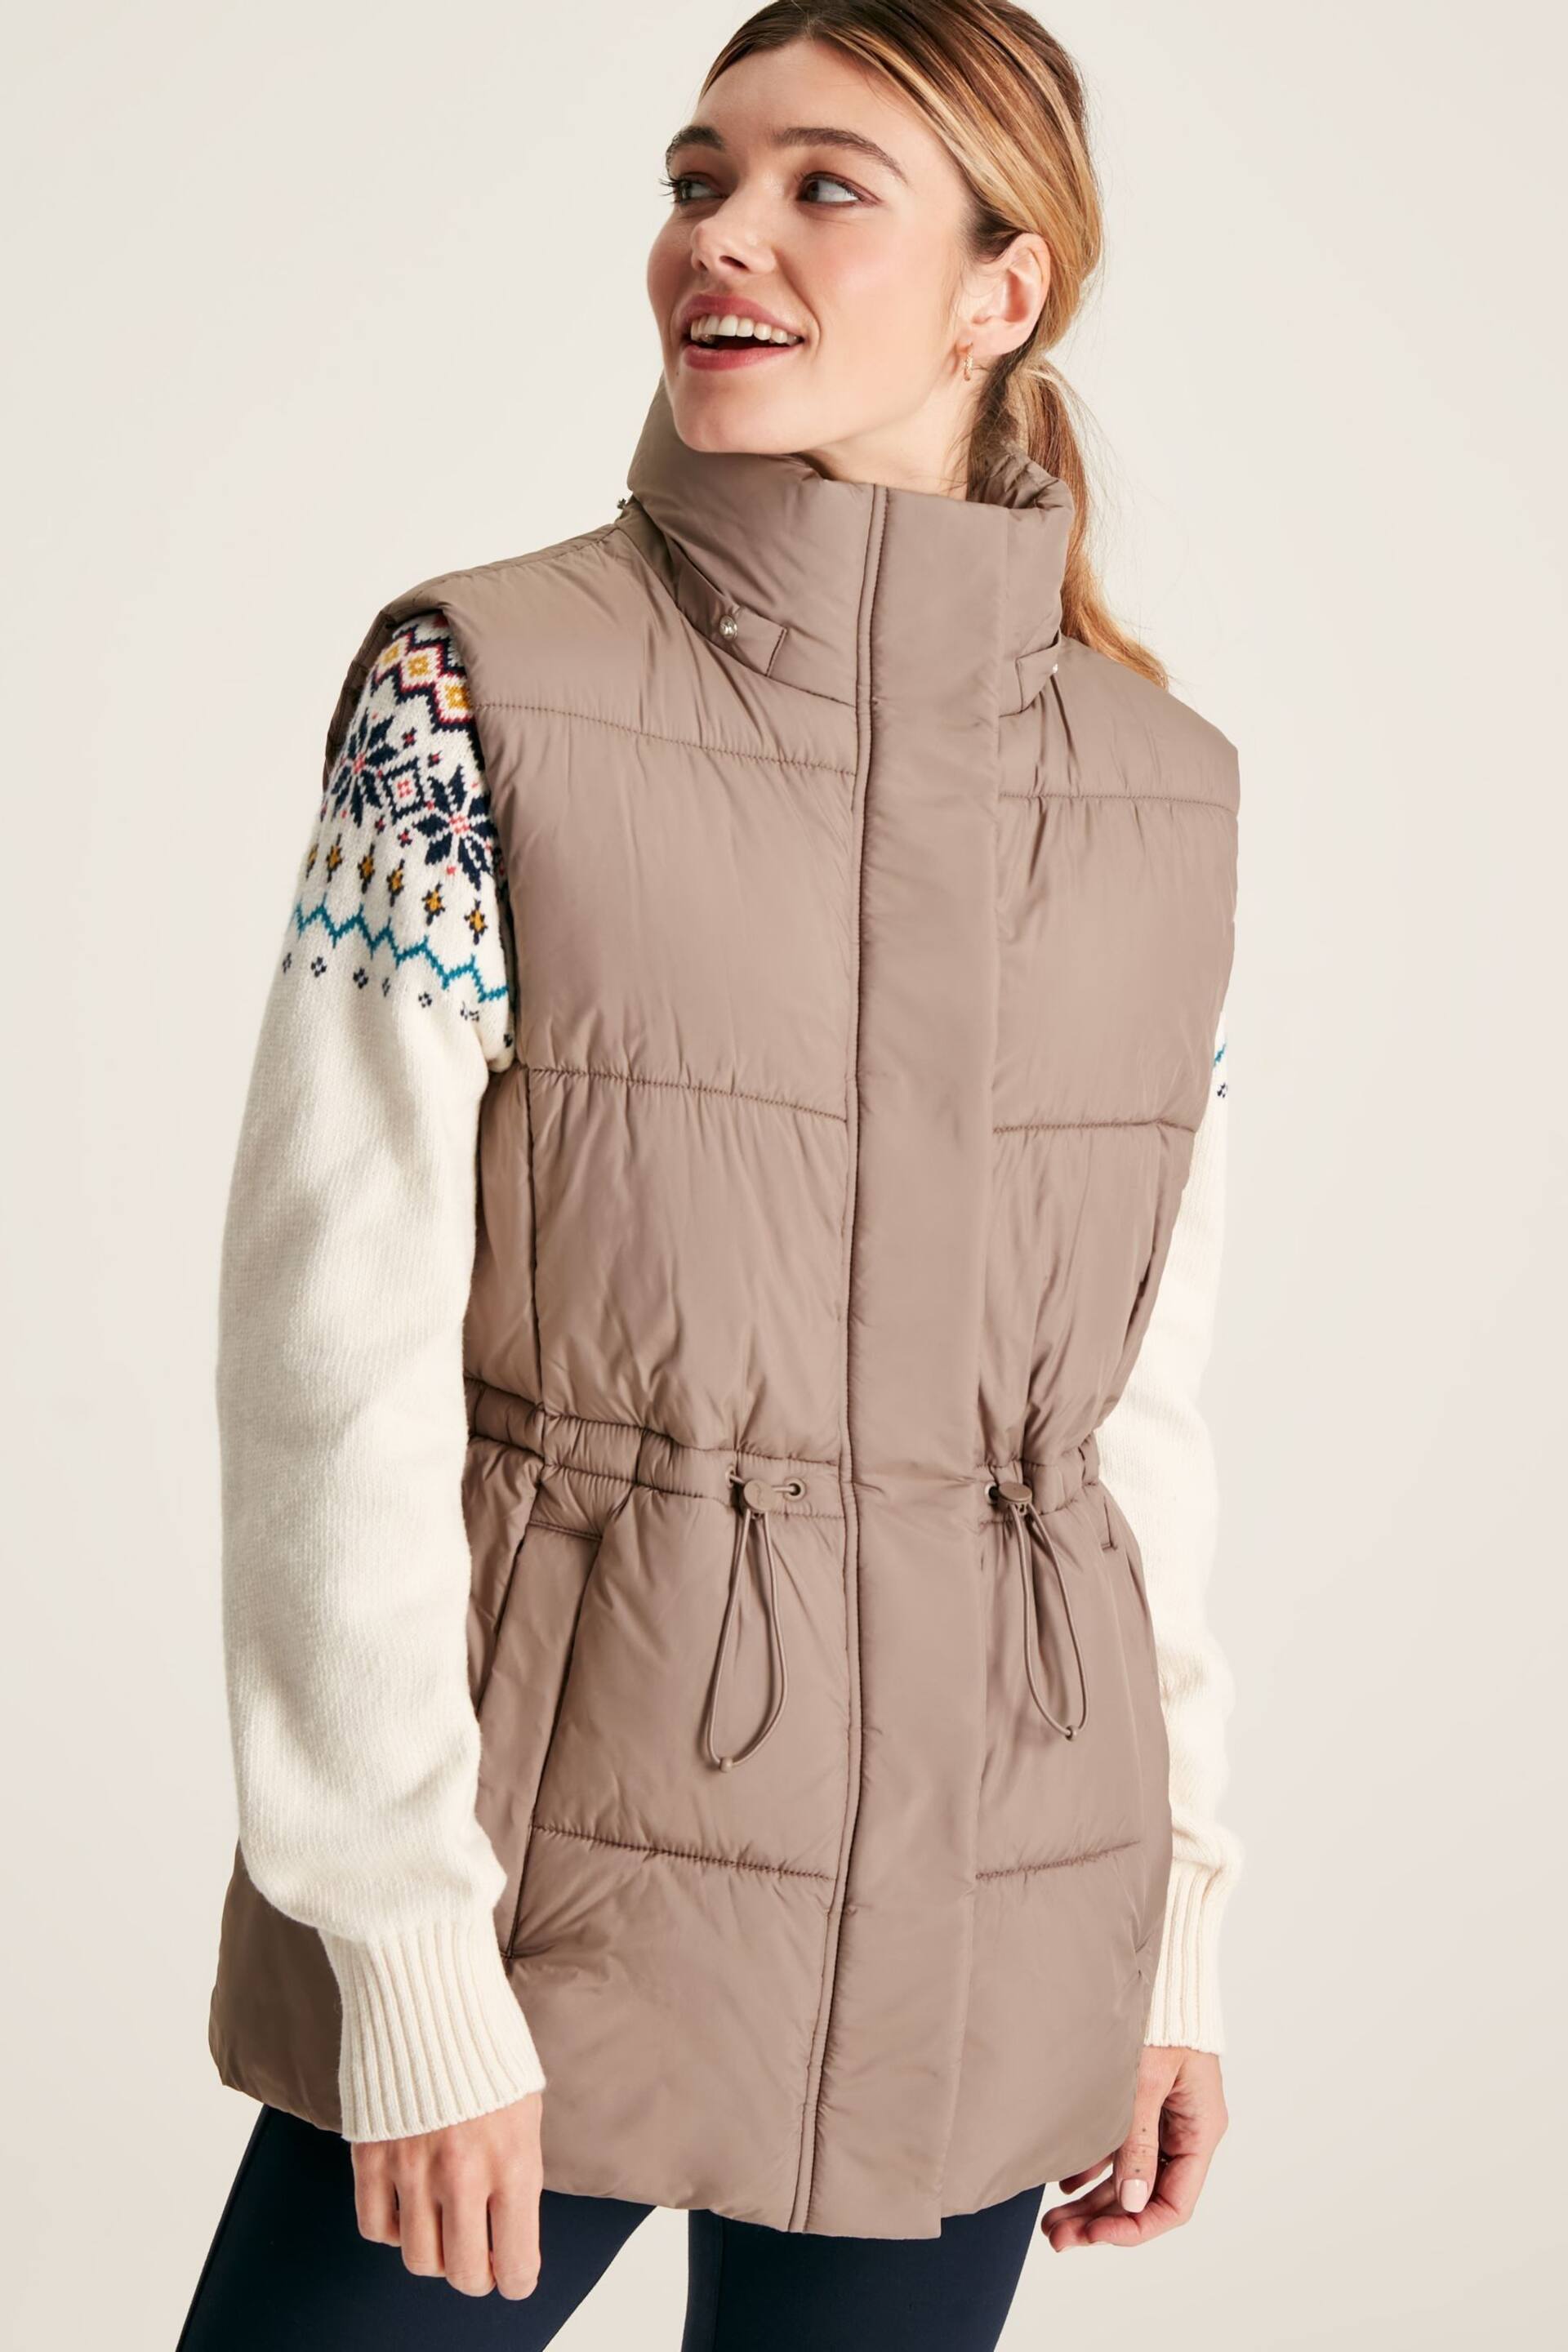 Joules Witham Silver Showerproof Padded Gilet With Hood - Image 1 of 7